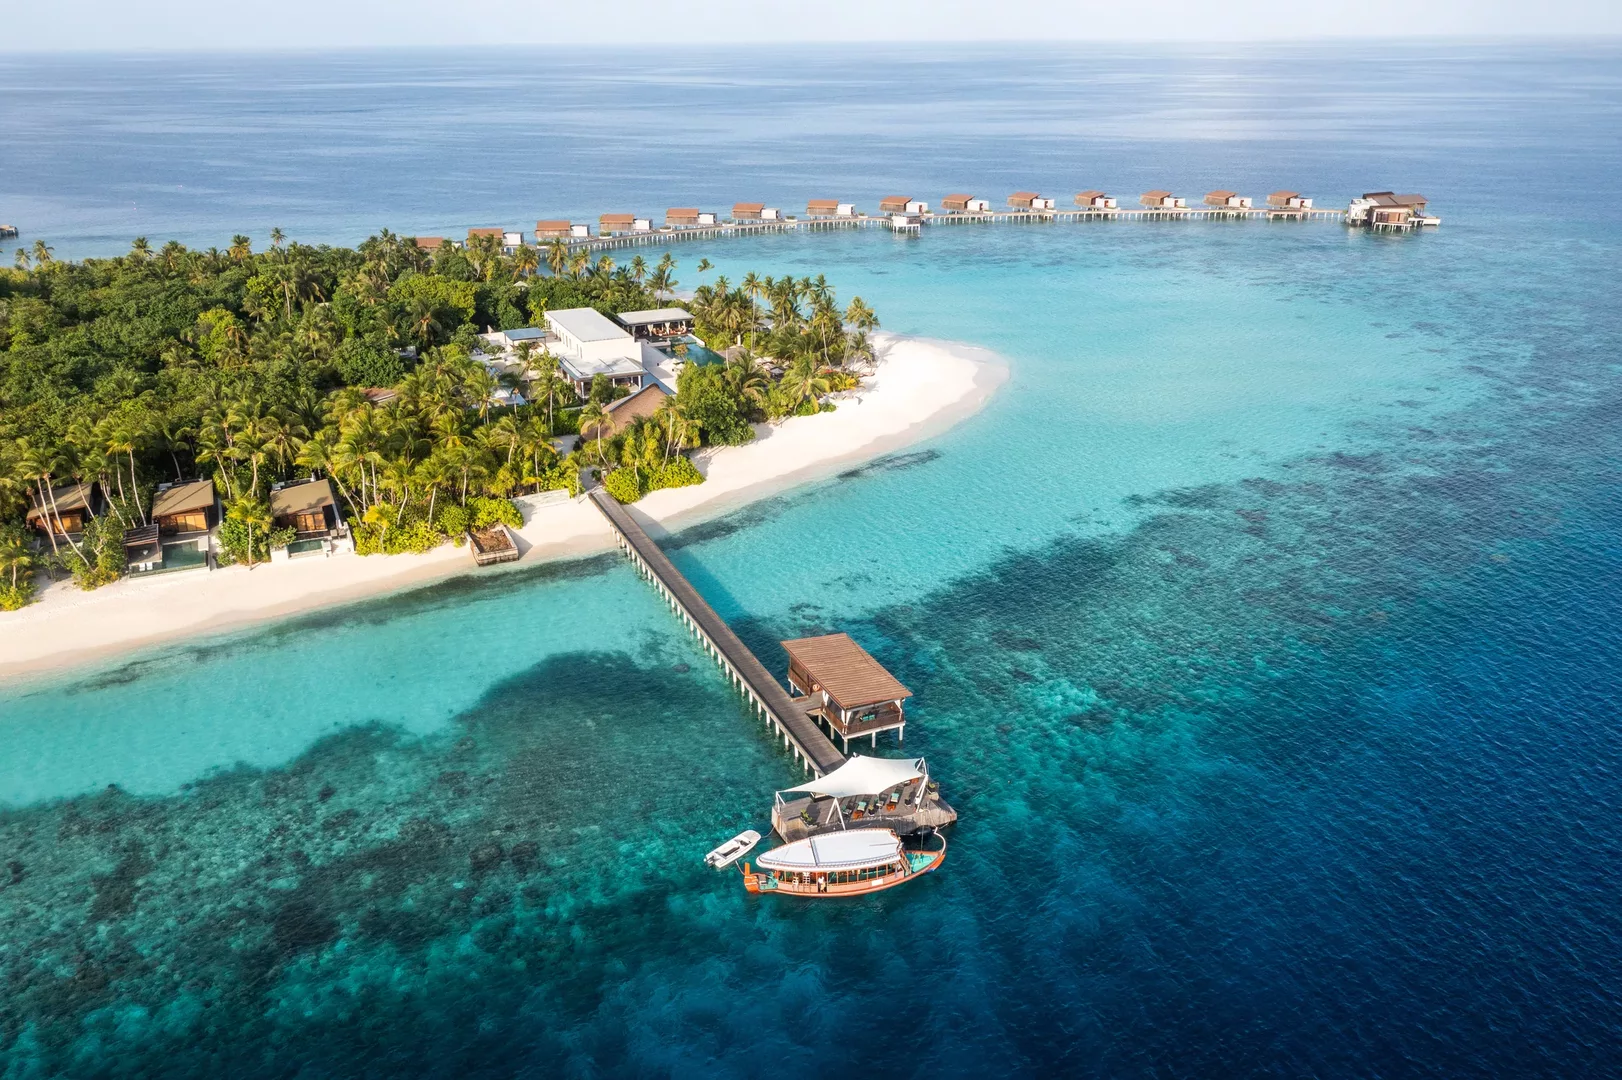 An aerial view of the Park Hyatt Hadahaa in the Maldives